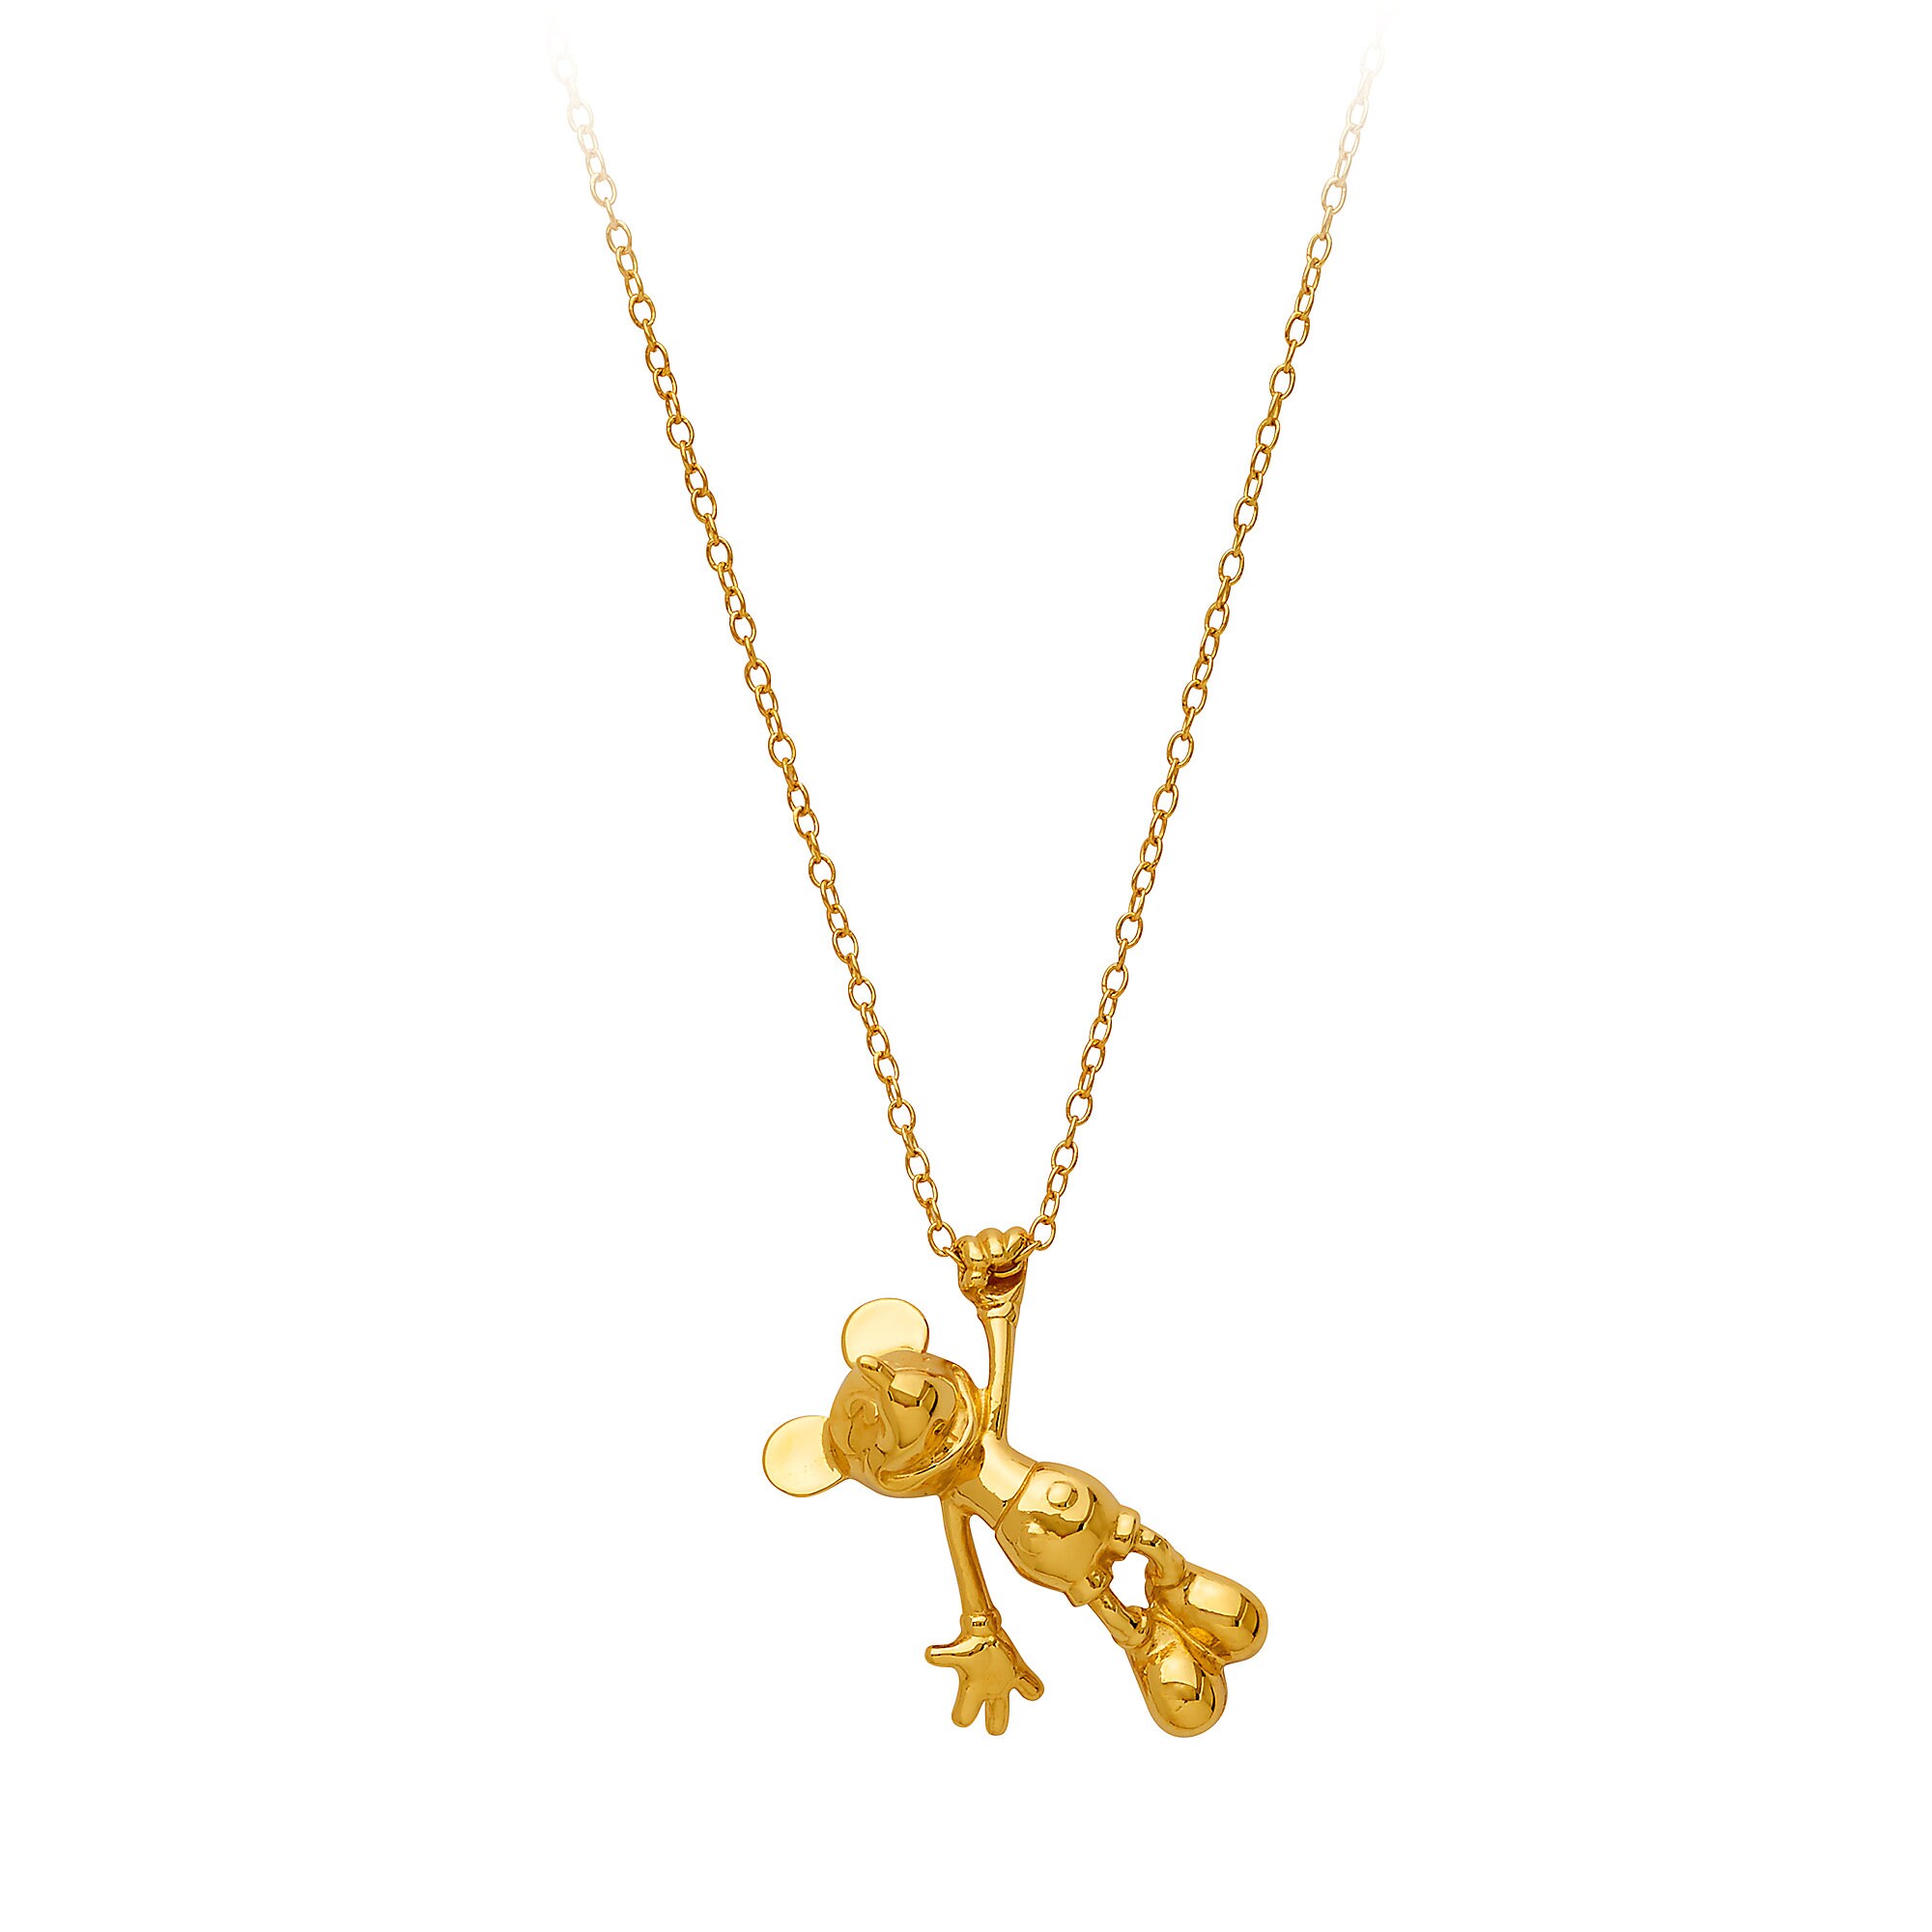 Mickey The True Original Gold Necklace by RockLove - Gold Collection